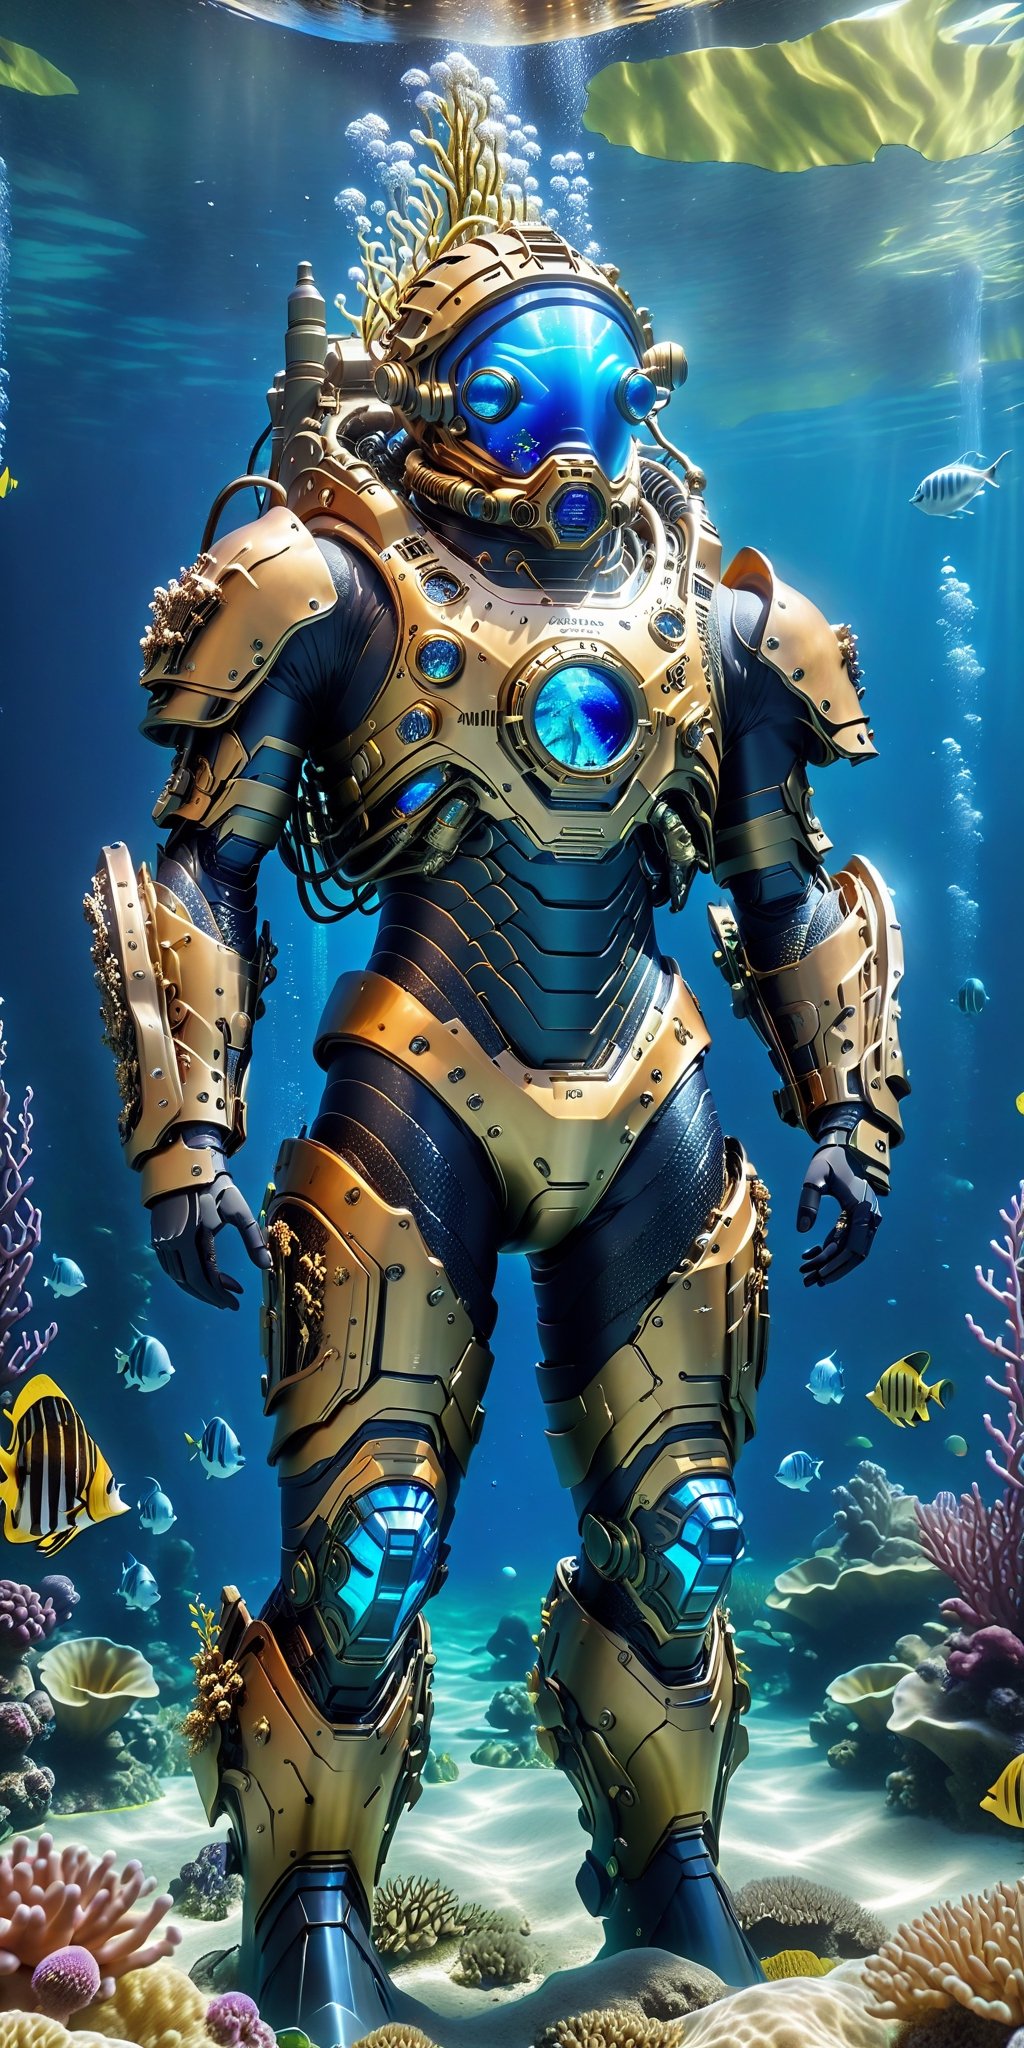 Generate an awe-inspiring image of a high-tech underwater armor suit surrounded by a stunning underwater scenery. The suit should look futuristic and cutting-edge, perfectly designed for underwater exploration. Surround the scene with magical underwater plants that emit a captivating and otherworldly glow, creating a visually striking and enchanting composition,DonMDj1nnM4g1cXL 